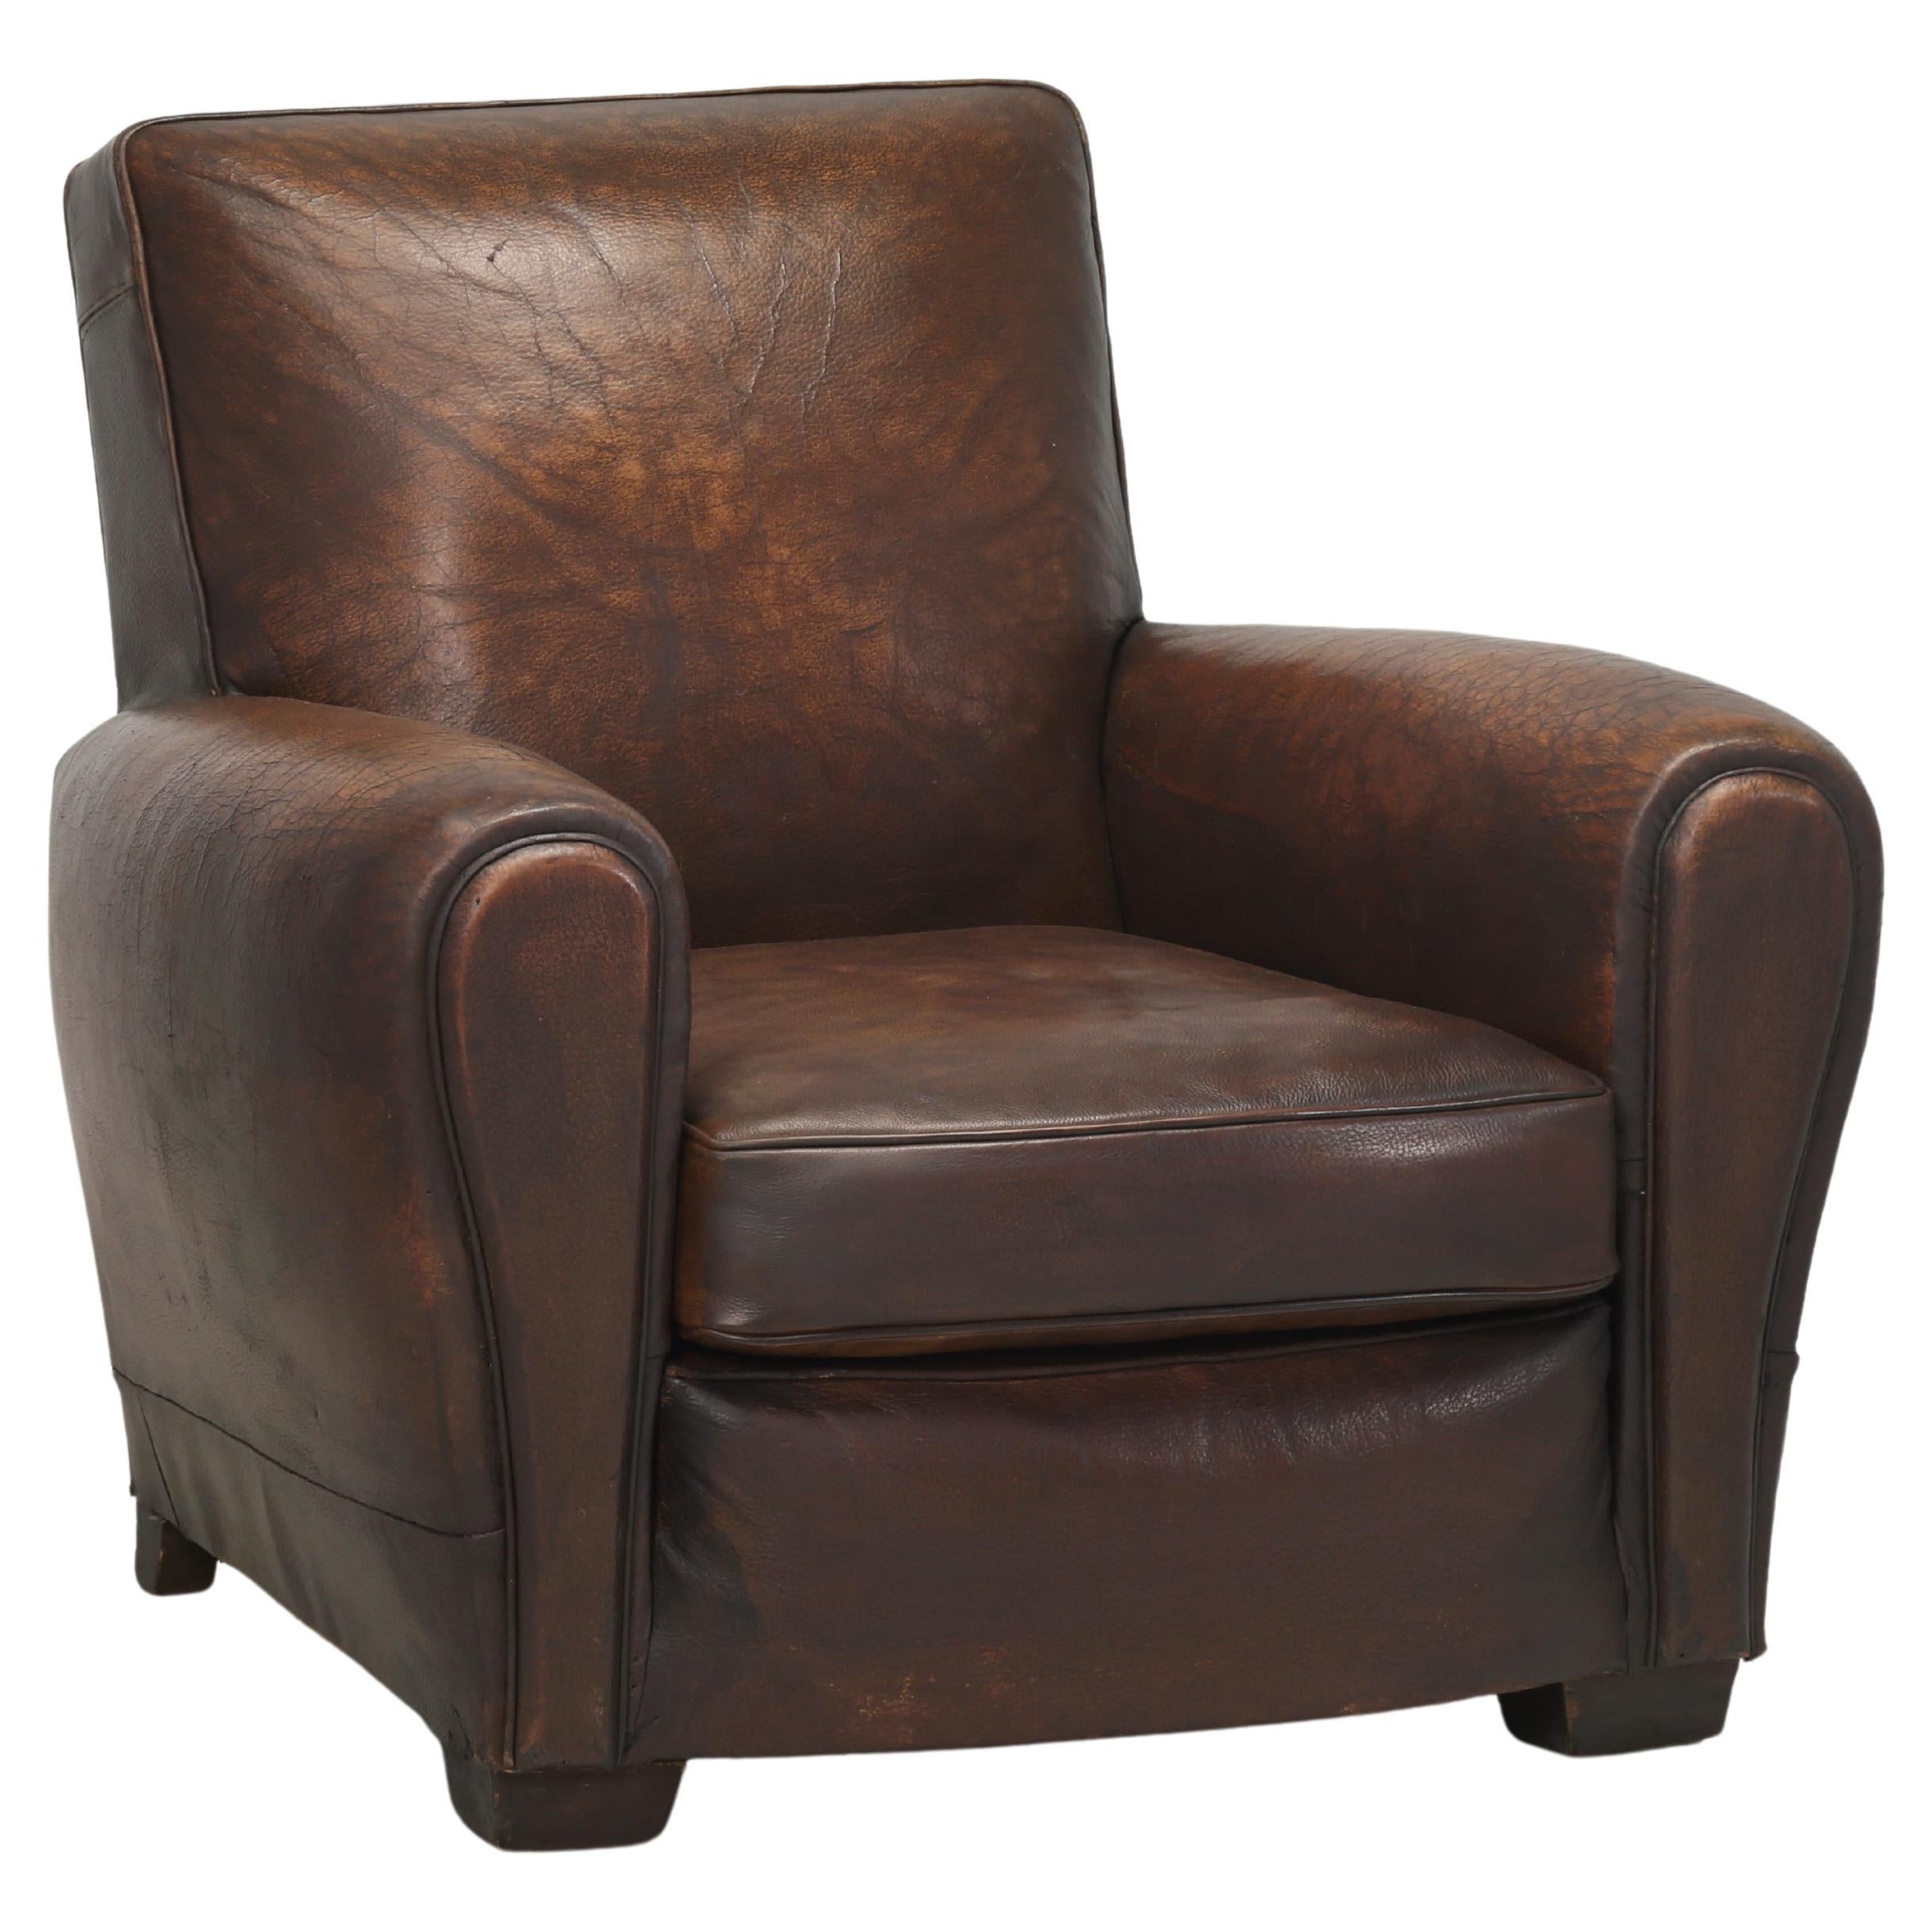 Vintage Leather Club Chair Internally Restored Cosmetically Left Original c1930s For Sale